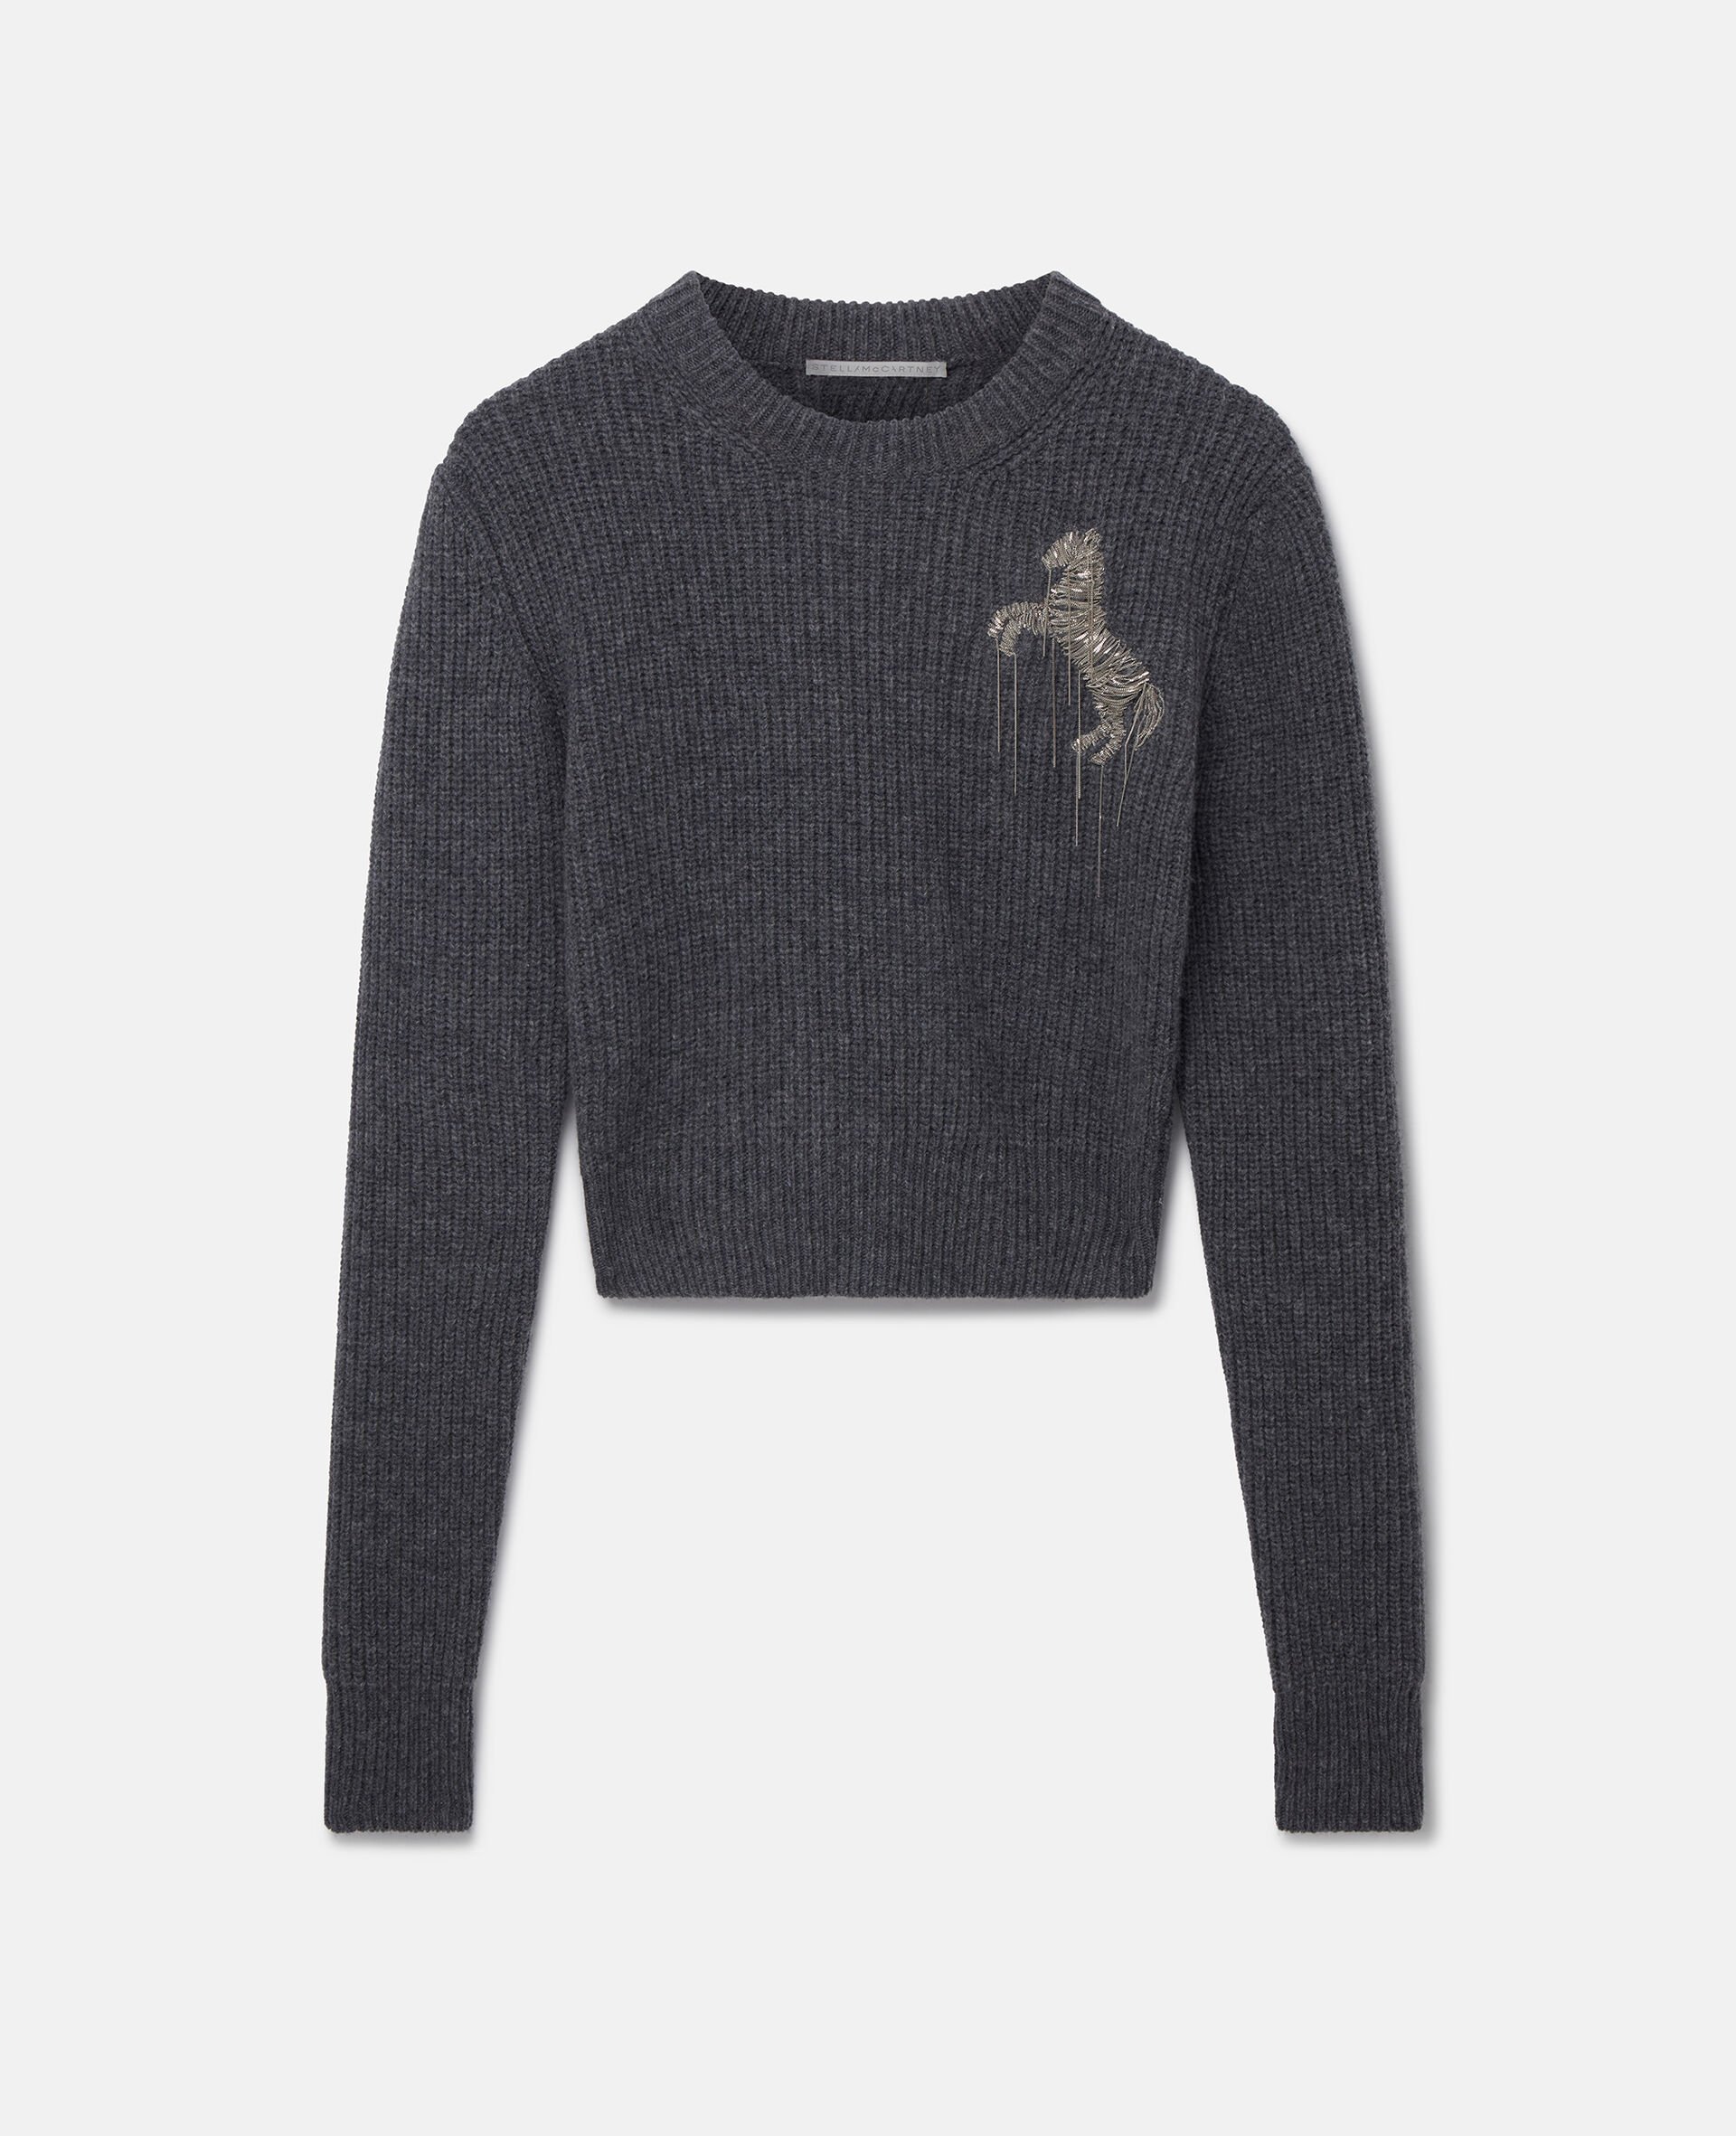 Horse Chain Embroidery Cropped Jumper-Multicolour-large image number 0